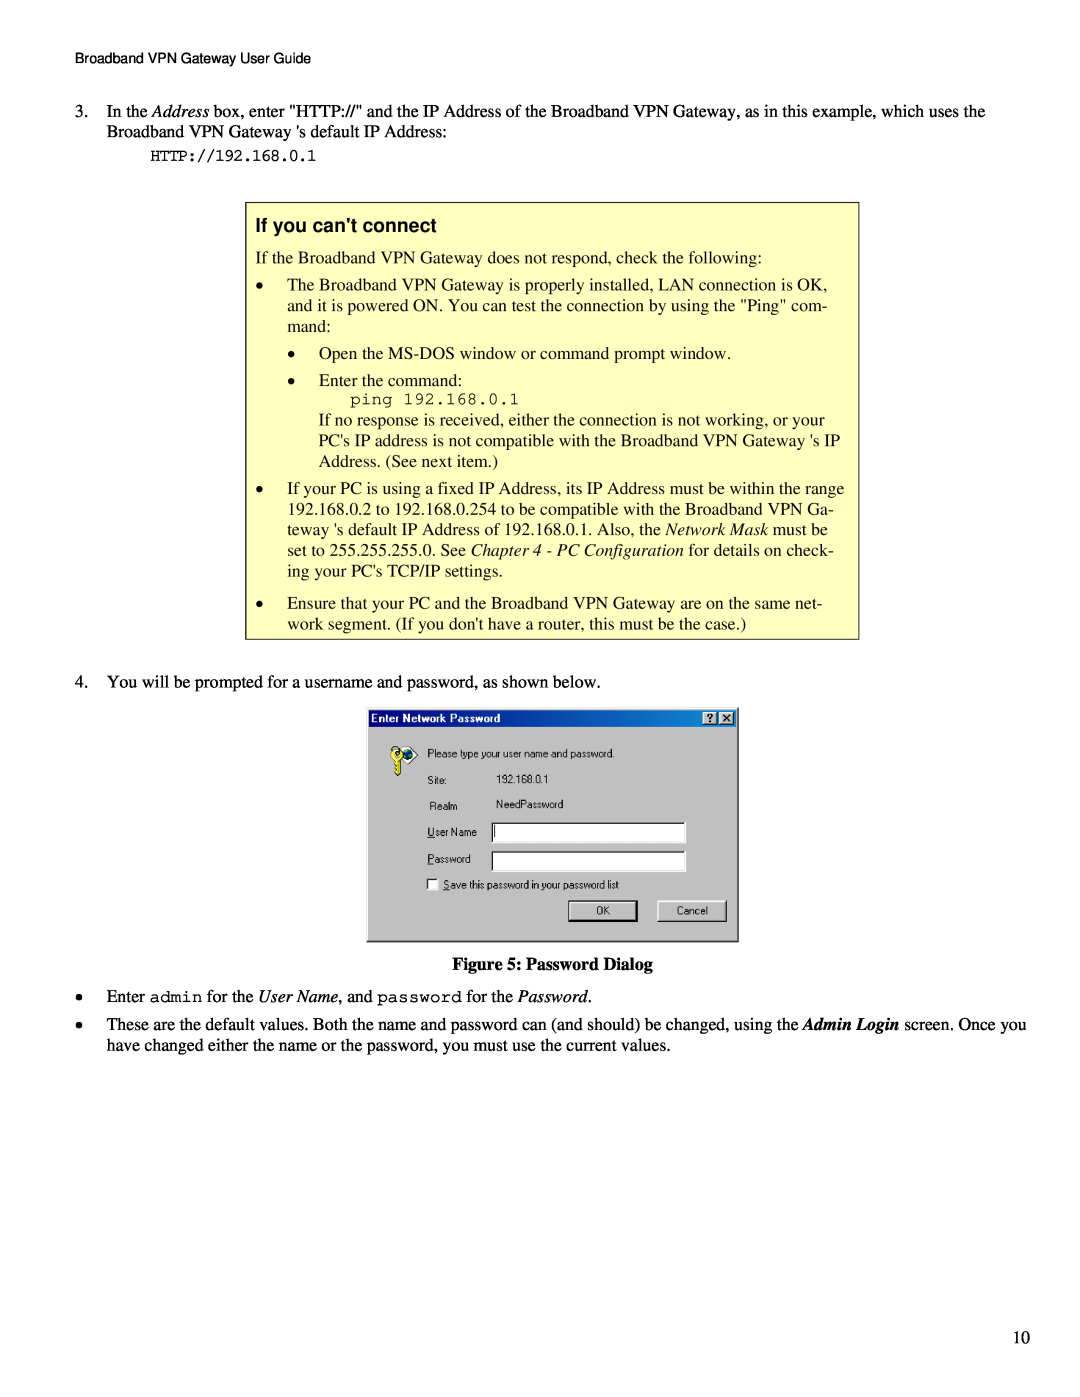 TRENDnet TW100-BRV324 manual If you cant connect, Password Dialog 